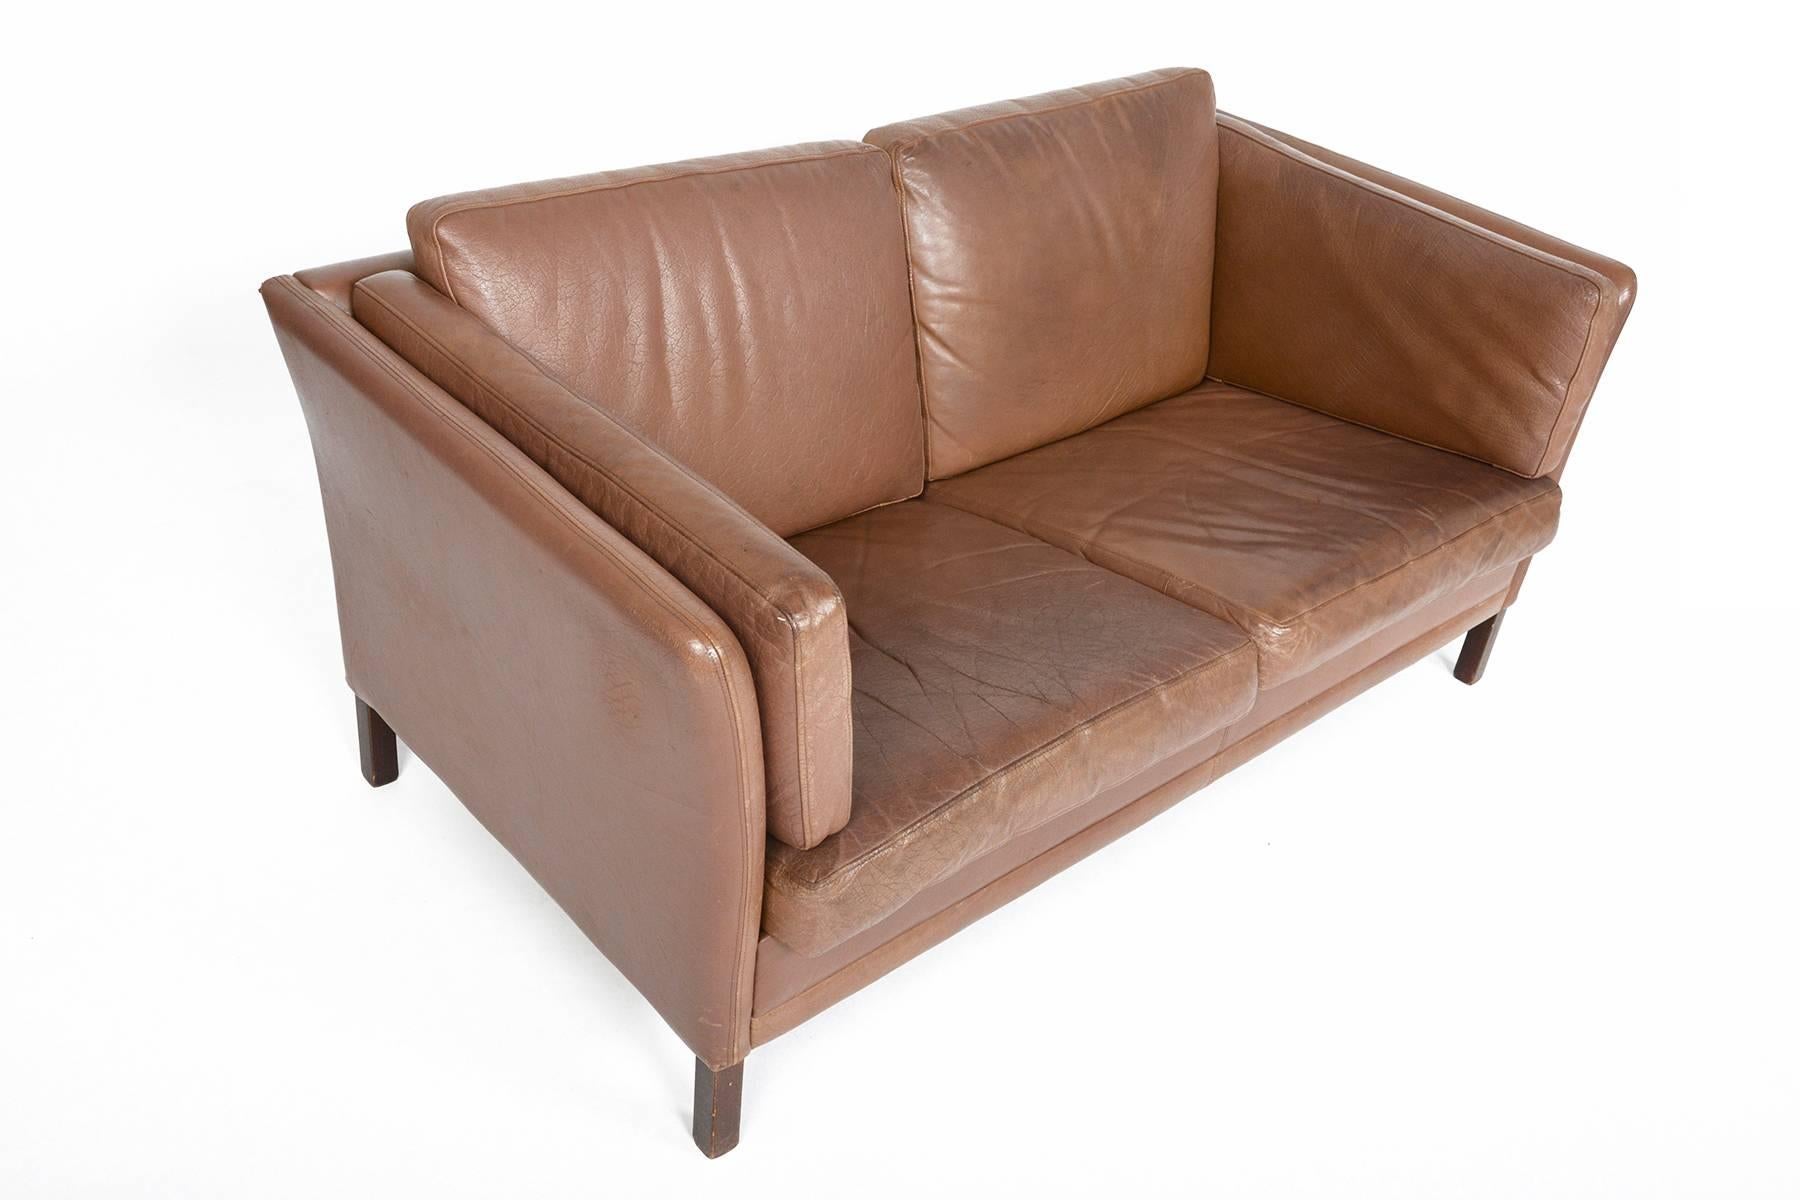 This beautifully sculpted loveseat sofa was manufactured by Stouby in the 1960s. This simple flared arm design offers an elegant profile. Six patinated leather cushions nest in the fully upholstered frame. Finished in square tapered mahogany legs.